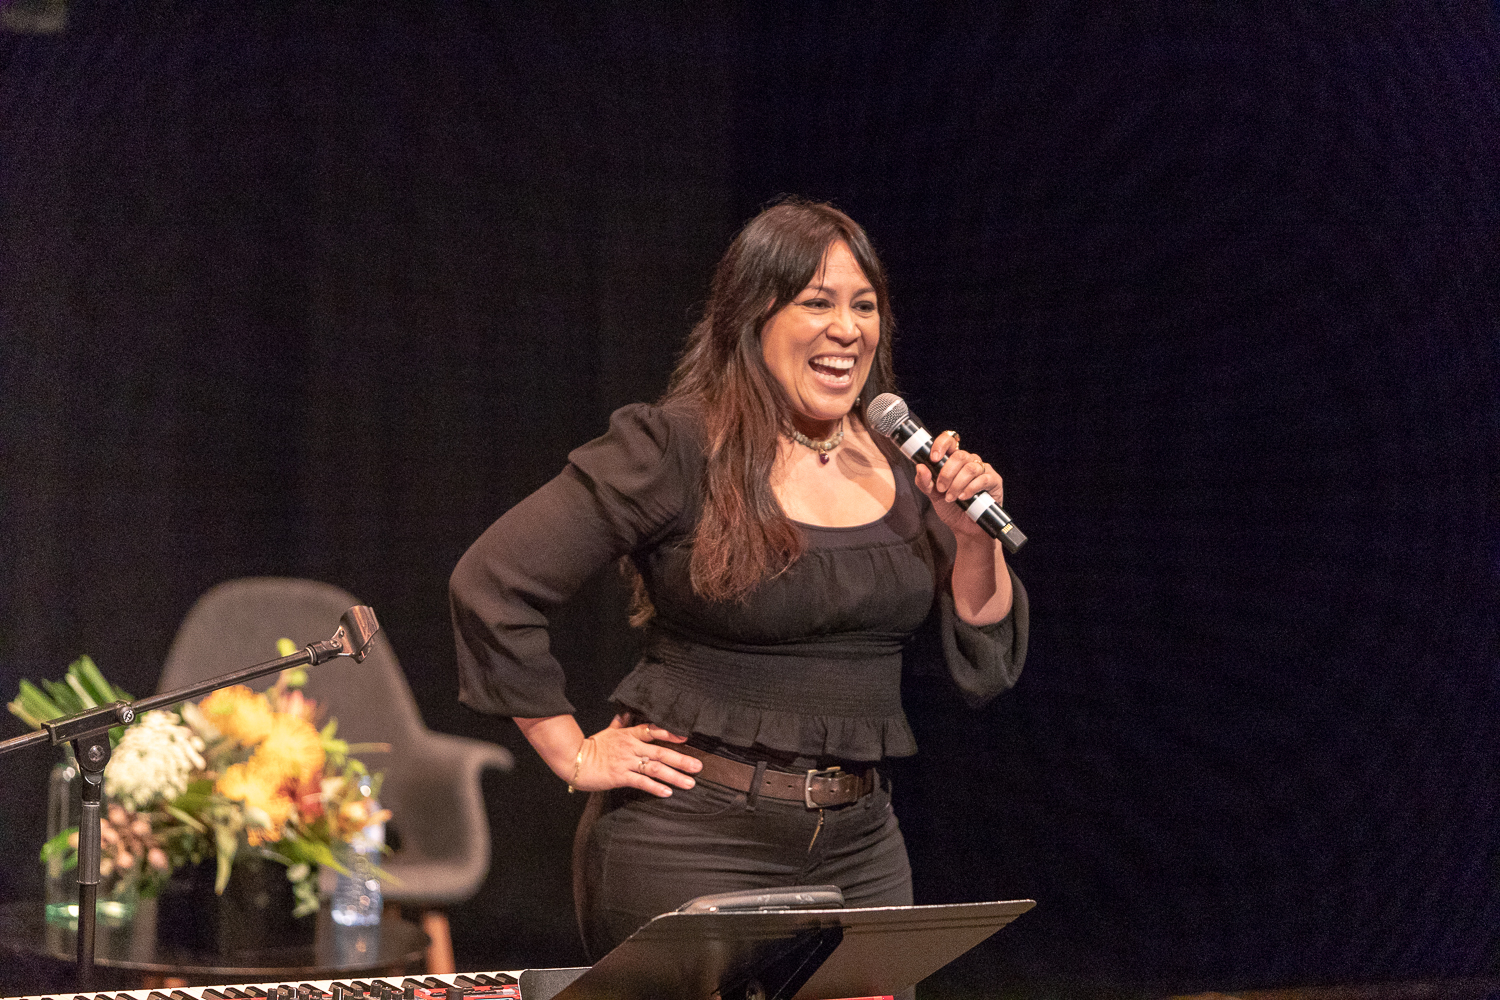 “I don’t believe my best has been delivered yet” – Kate Ceberano keynote blesses AWMAs day two